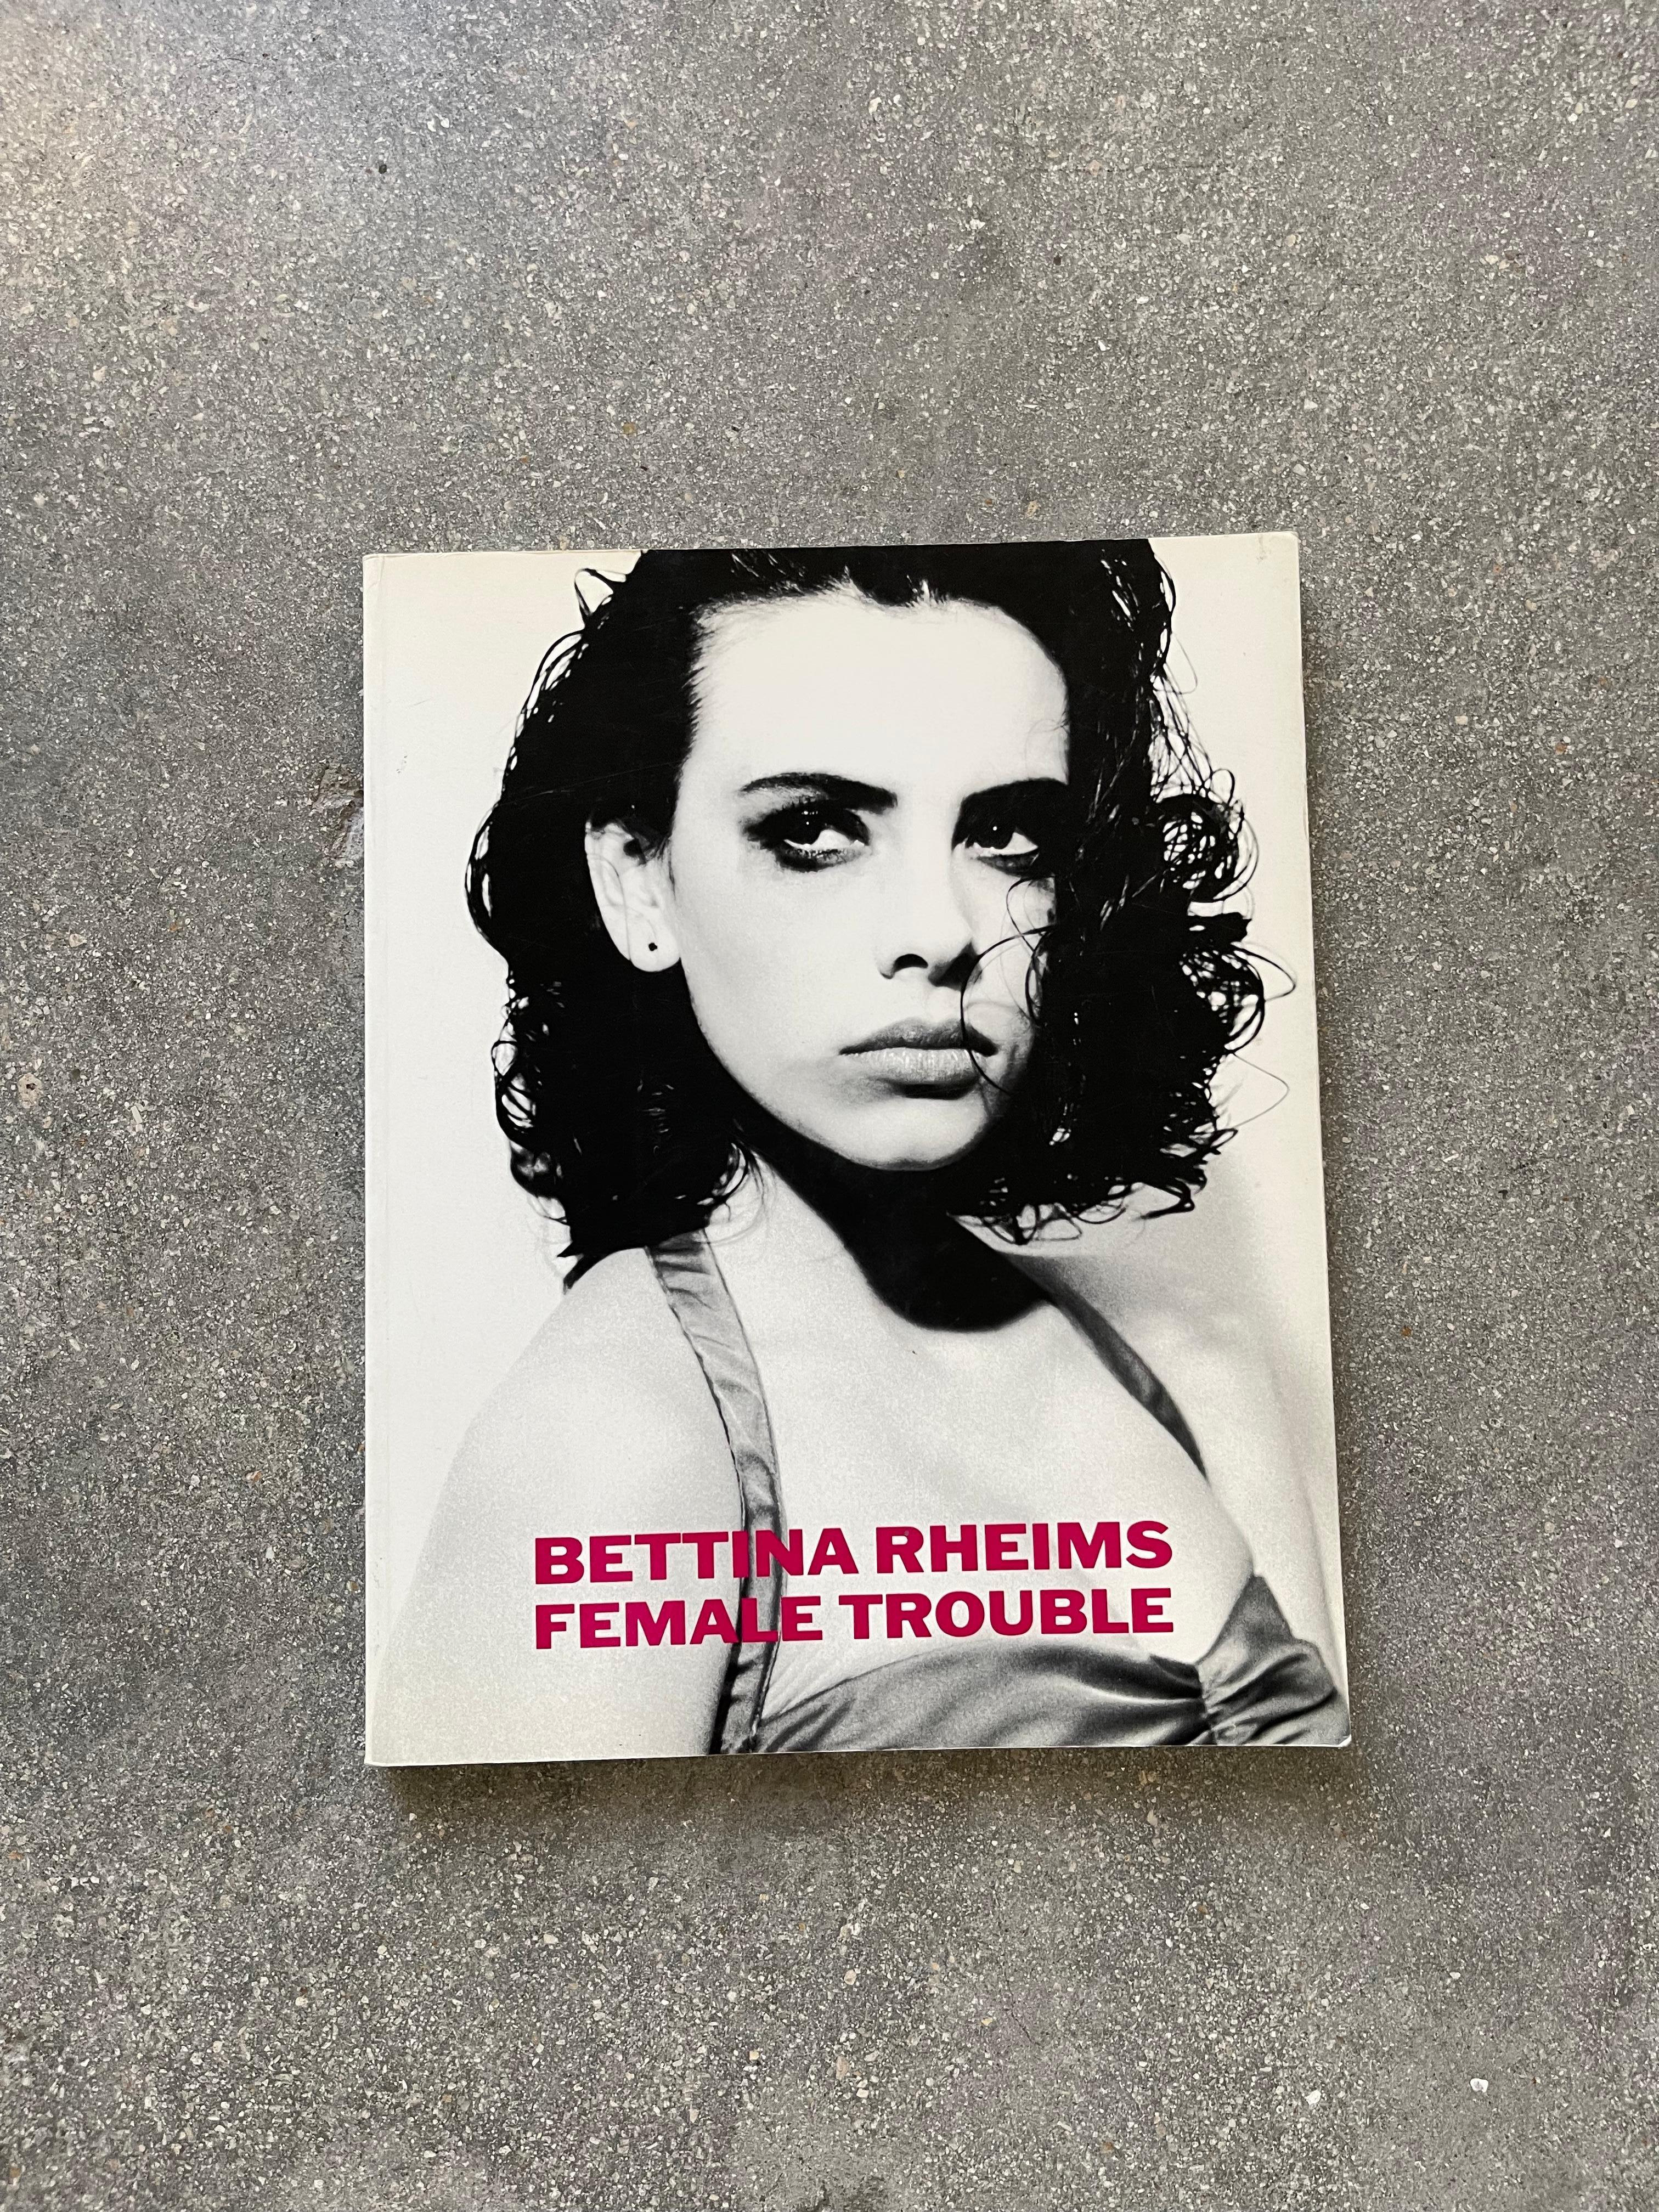 20th century Bettina Rheims: Female Trouble Photography Book. Bettina Rheims has been one of the most acclaimed woman photographers of France since the early 80s, when she first showed her sensational female nudes and portraits. Film stars,